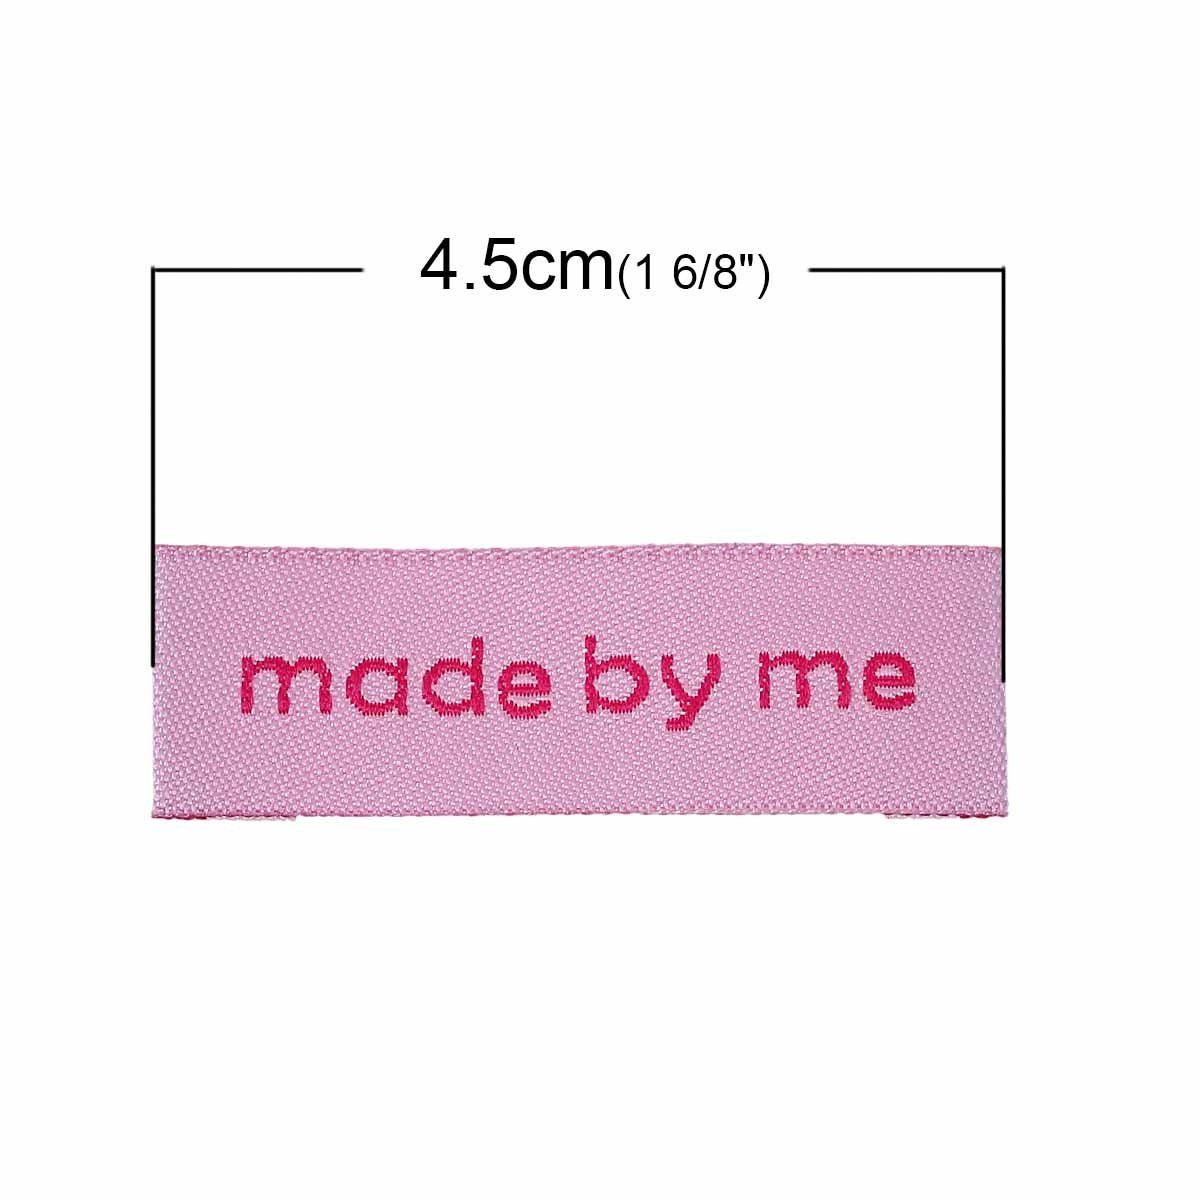 10 Pink woven printed sewing labels - different styles for choice